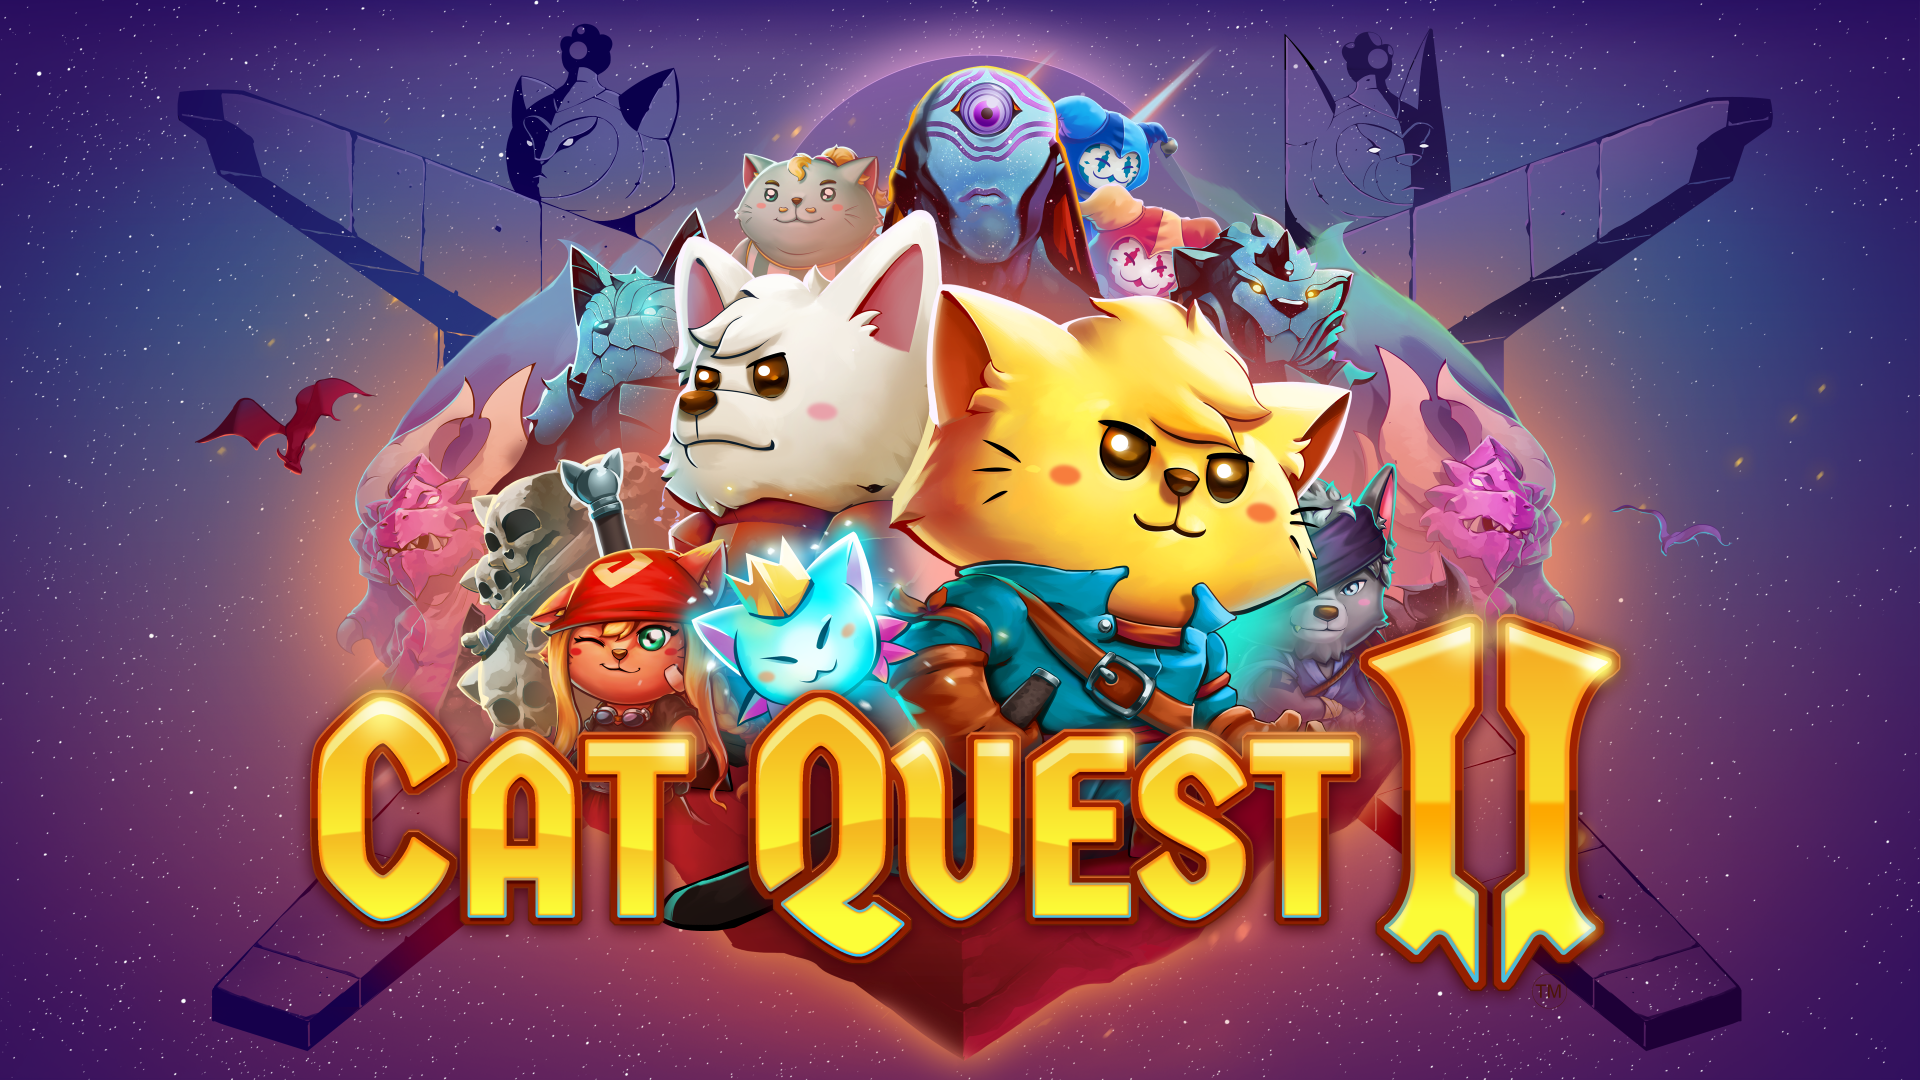 Cat Quest for ios download free